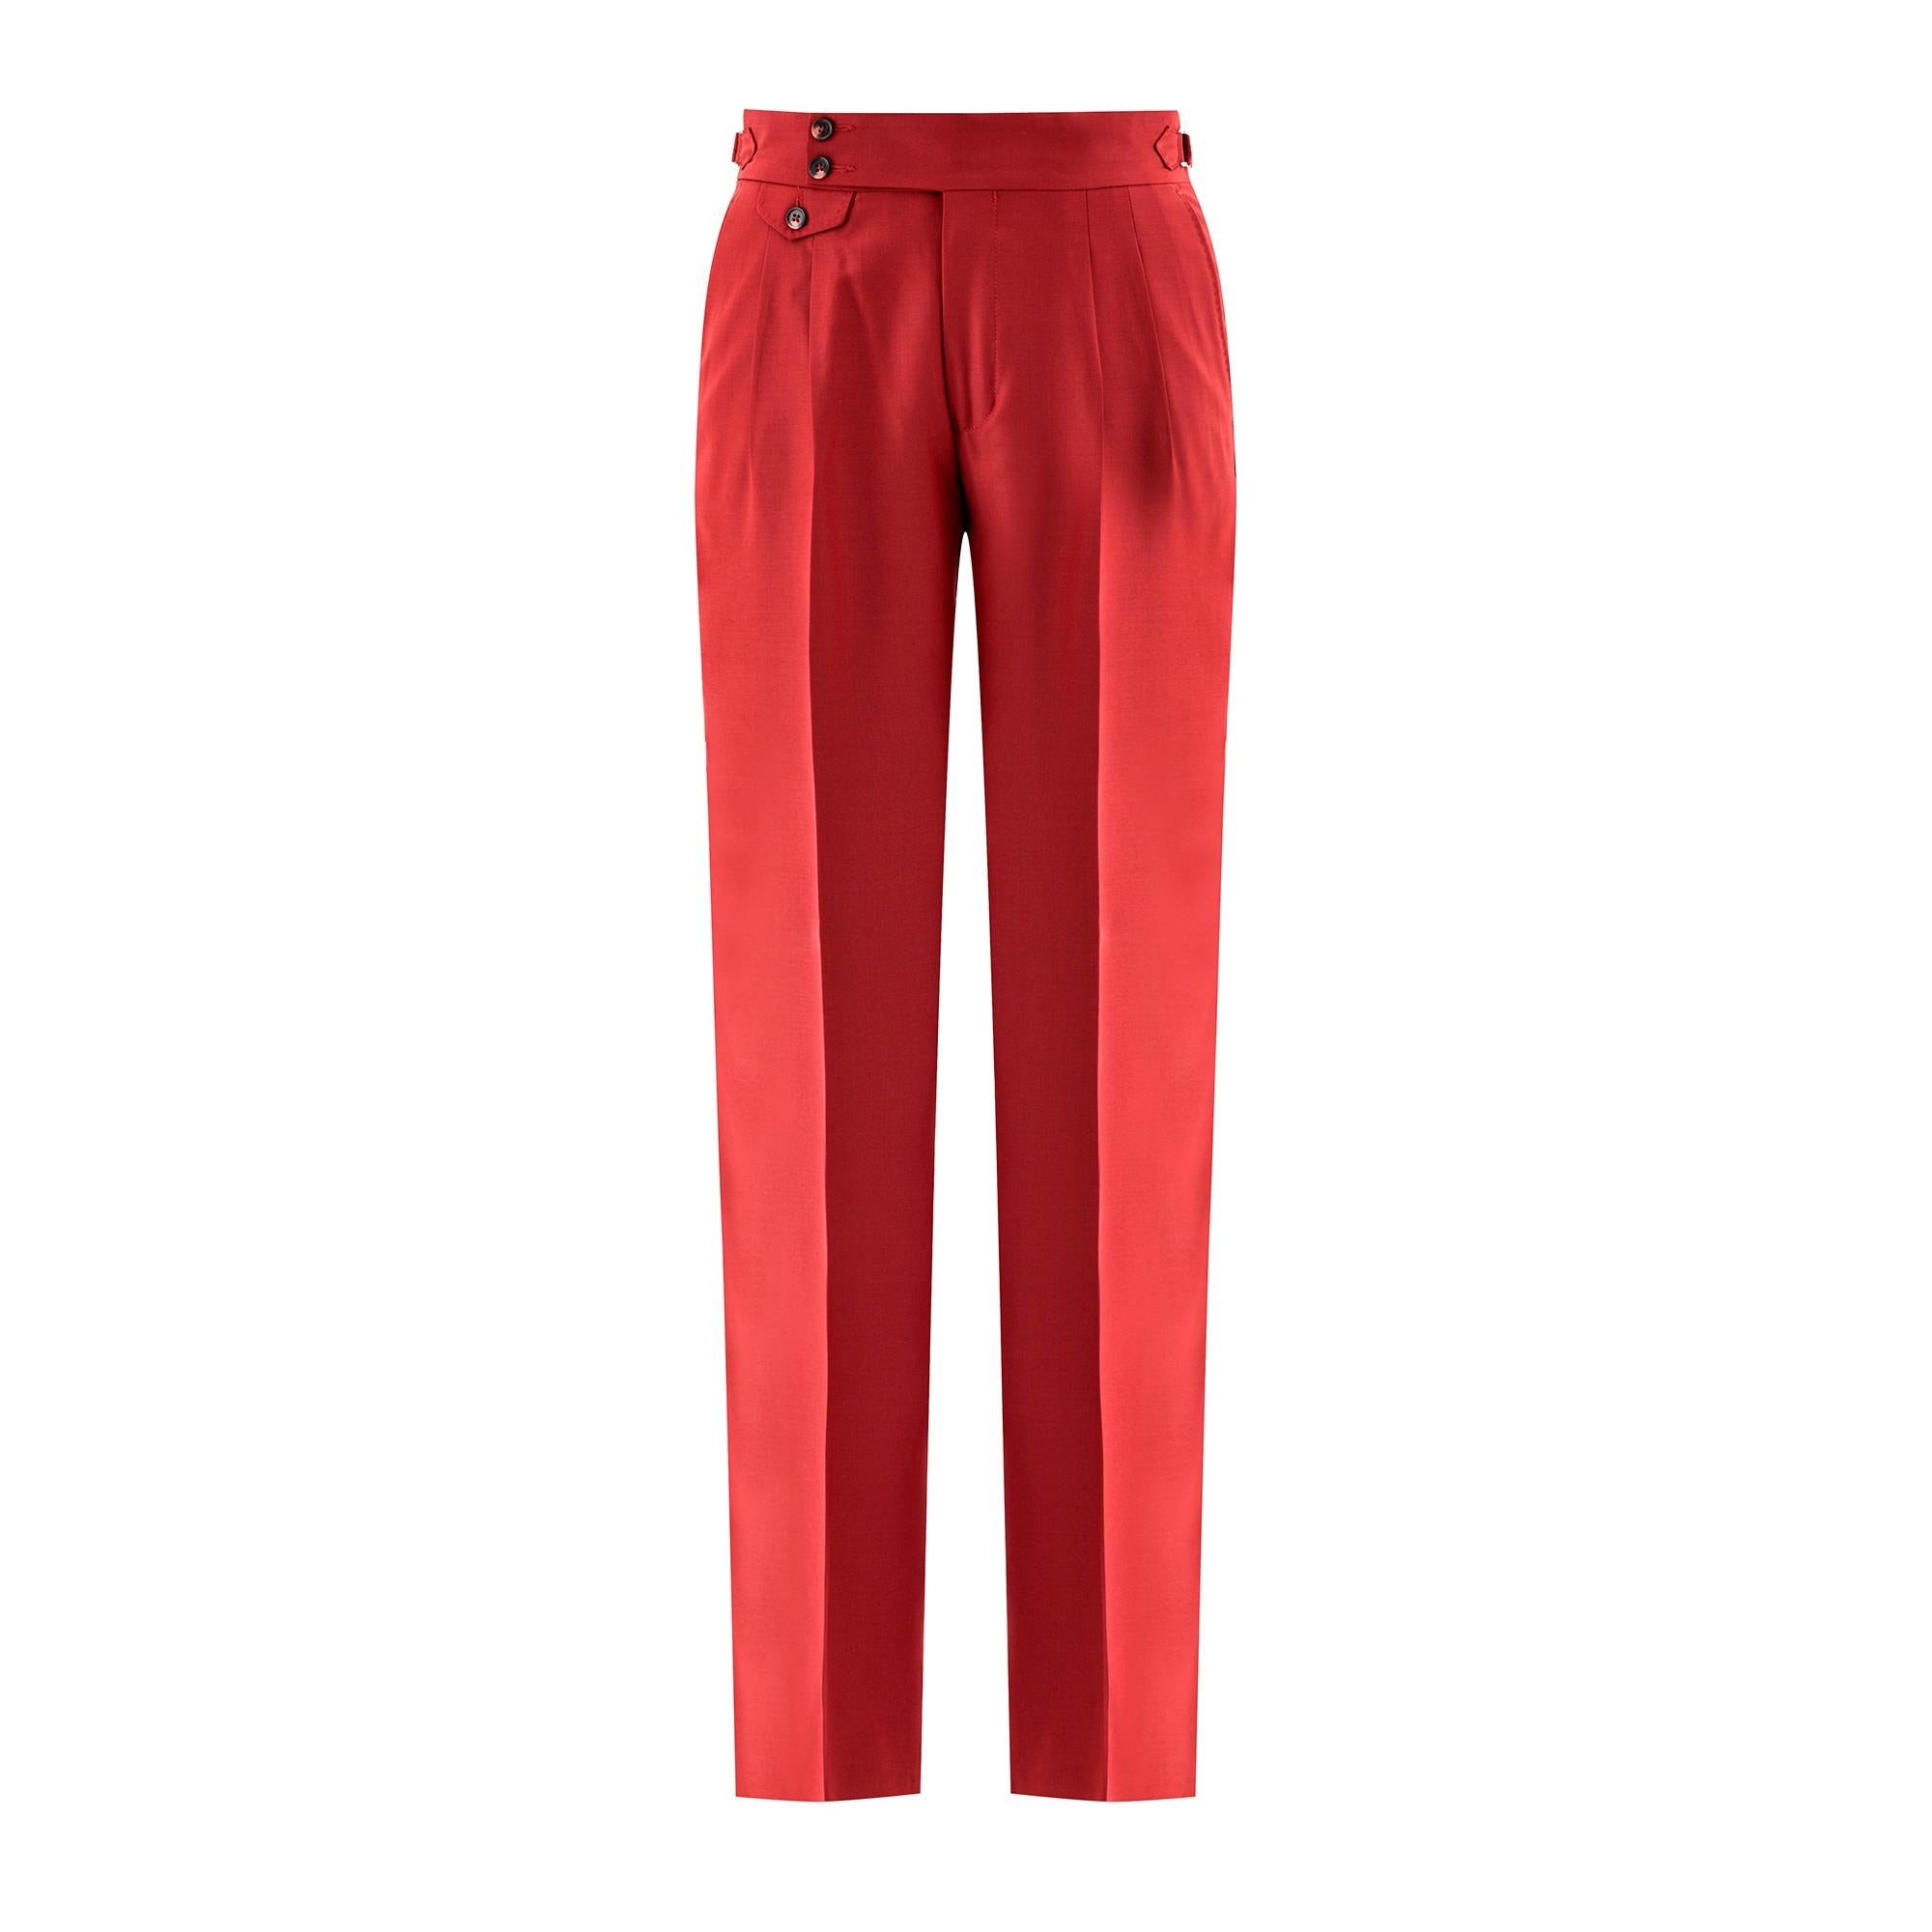 GALA RED TROUSERS